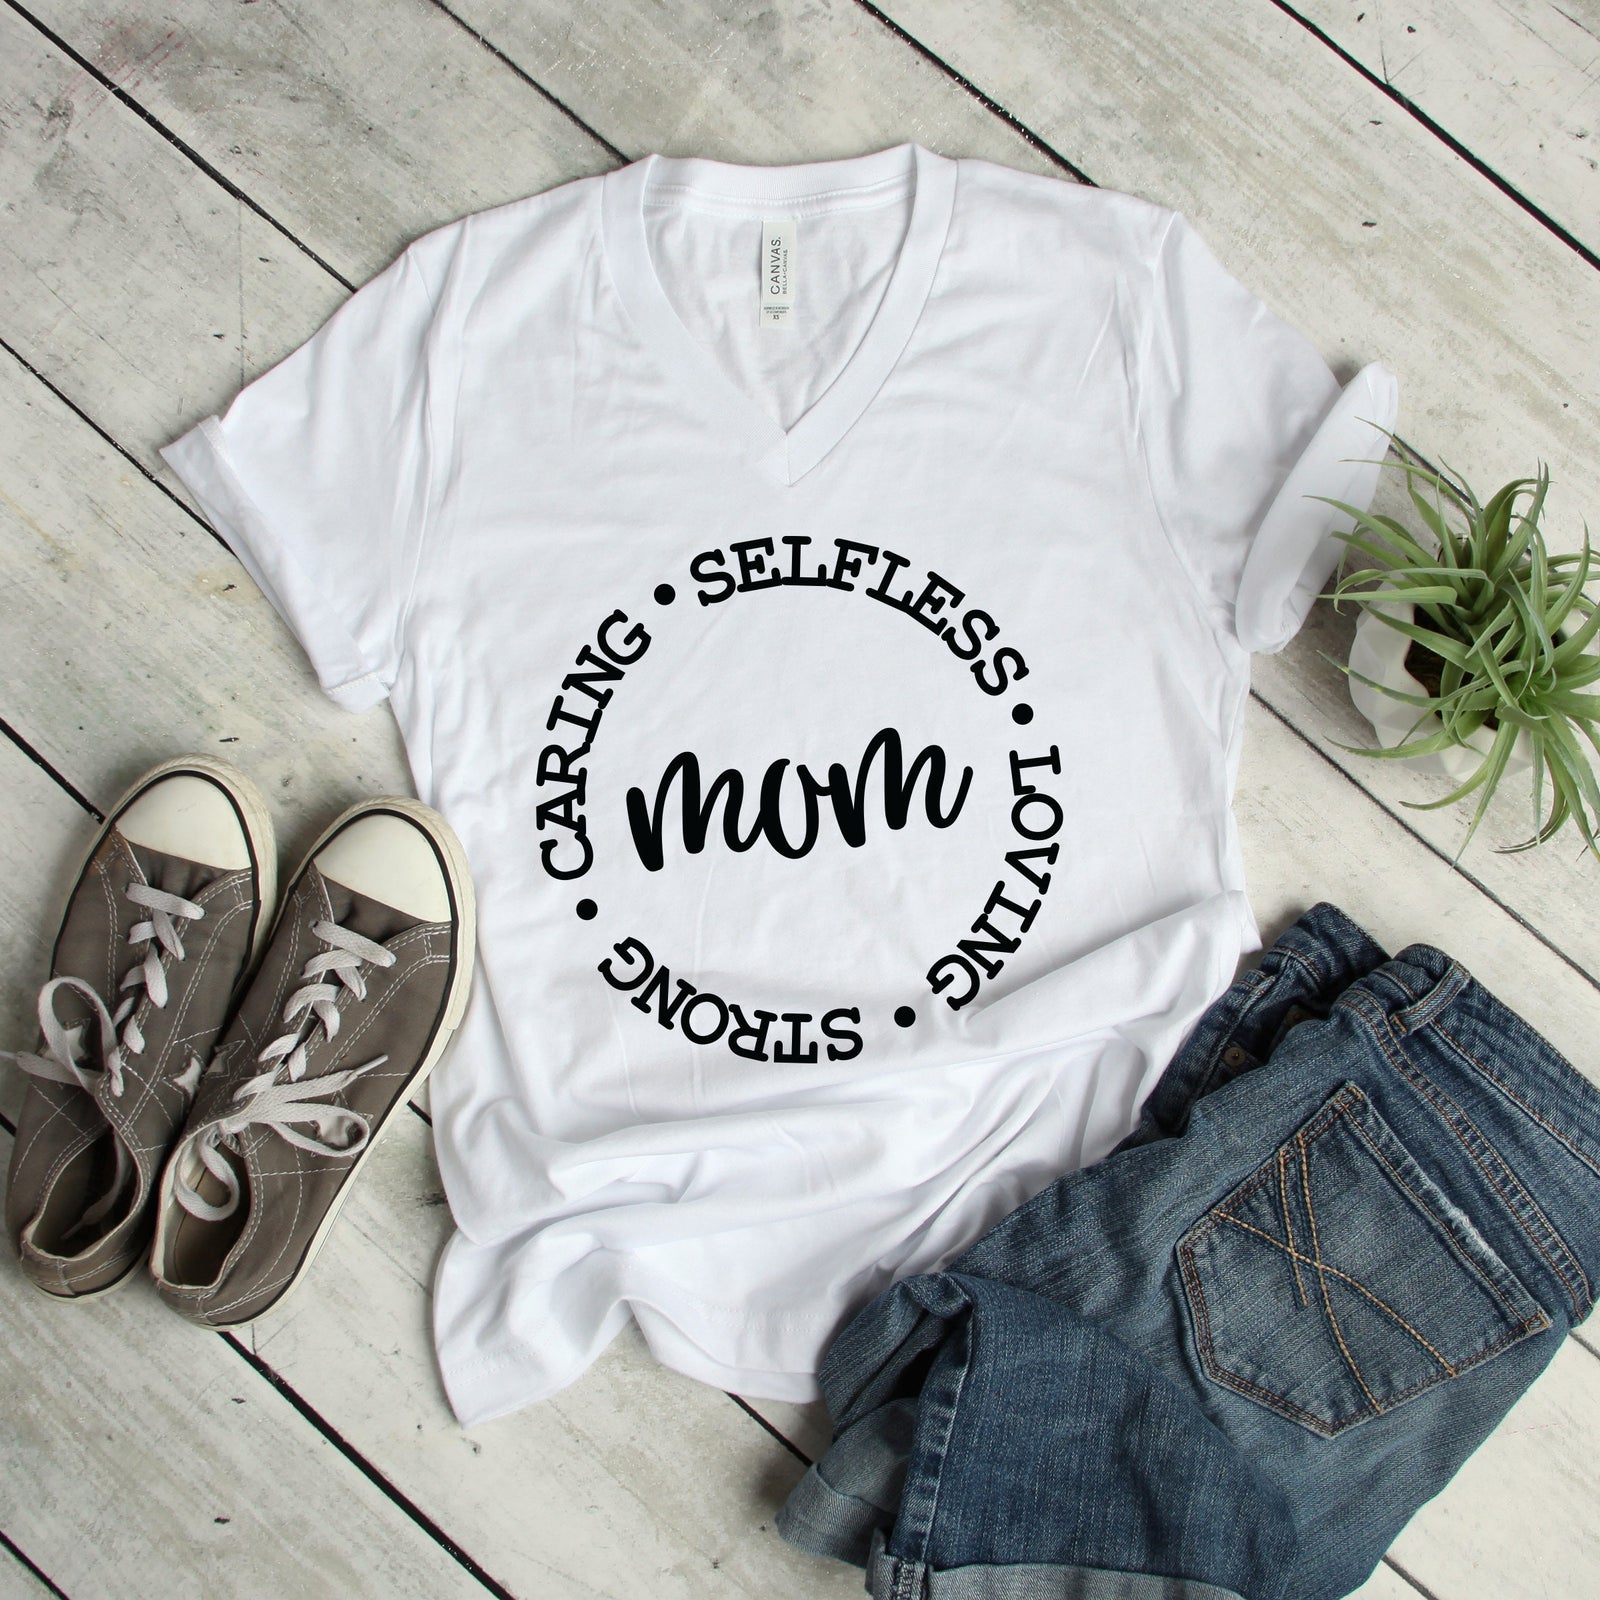 Mom T Shirt -Mother's Day Gift Idea - Selfless Caring Loving Strong MOM